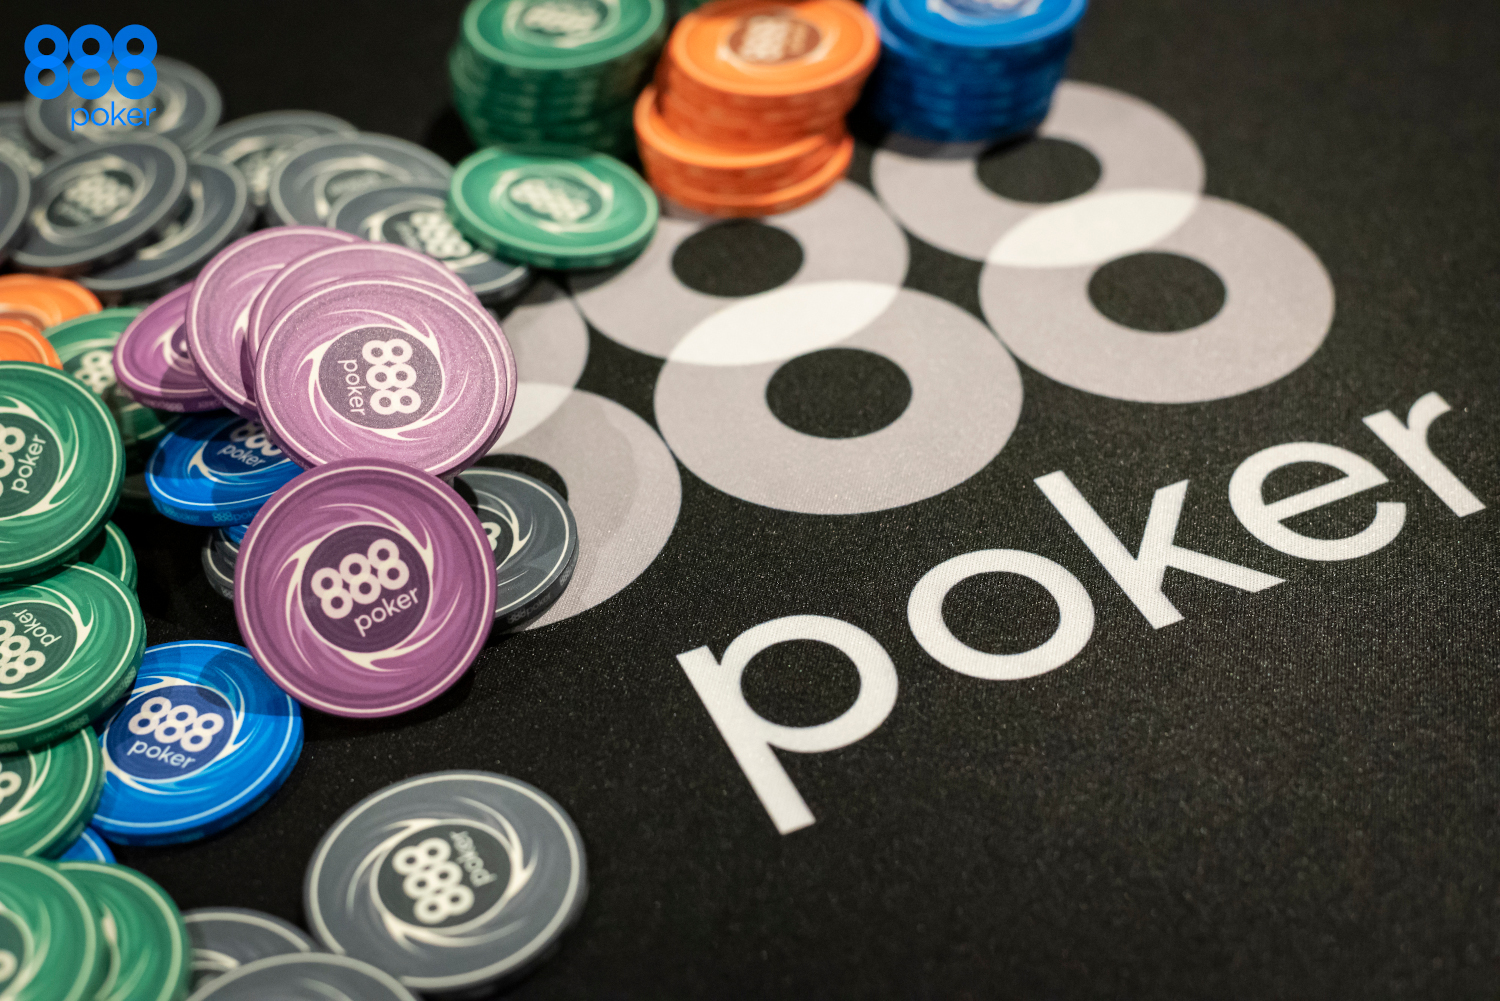 888poker and the PFL – A Match Made in Heaven!